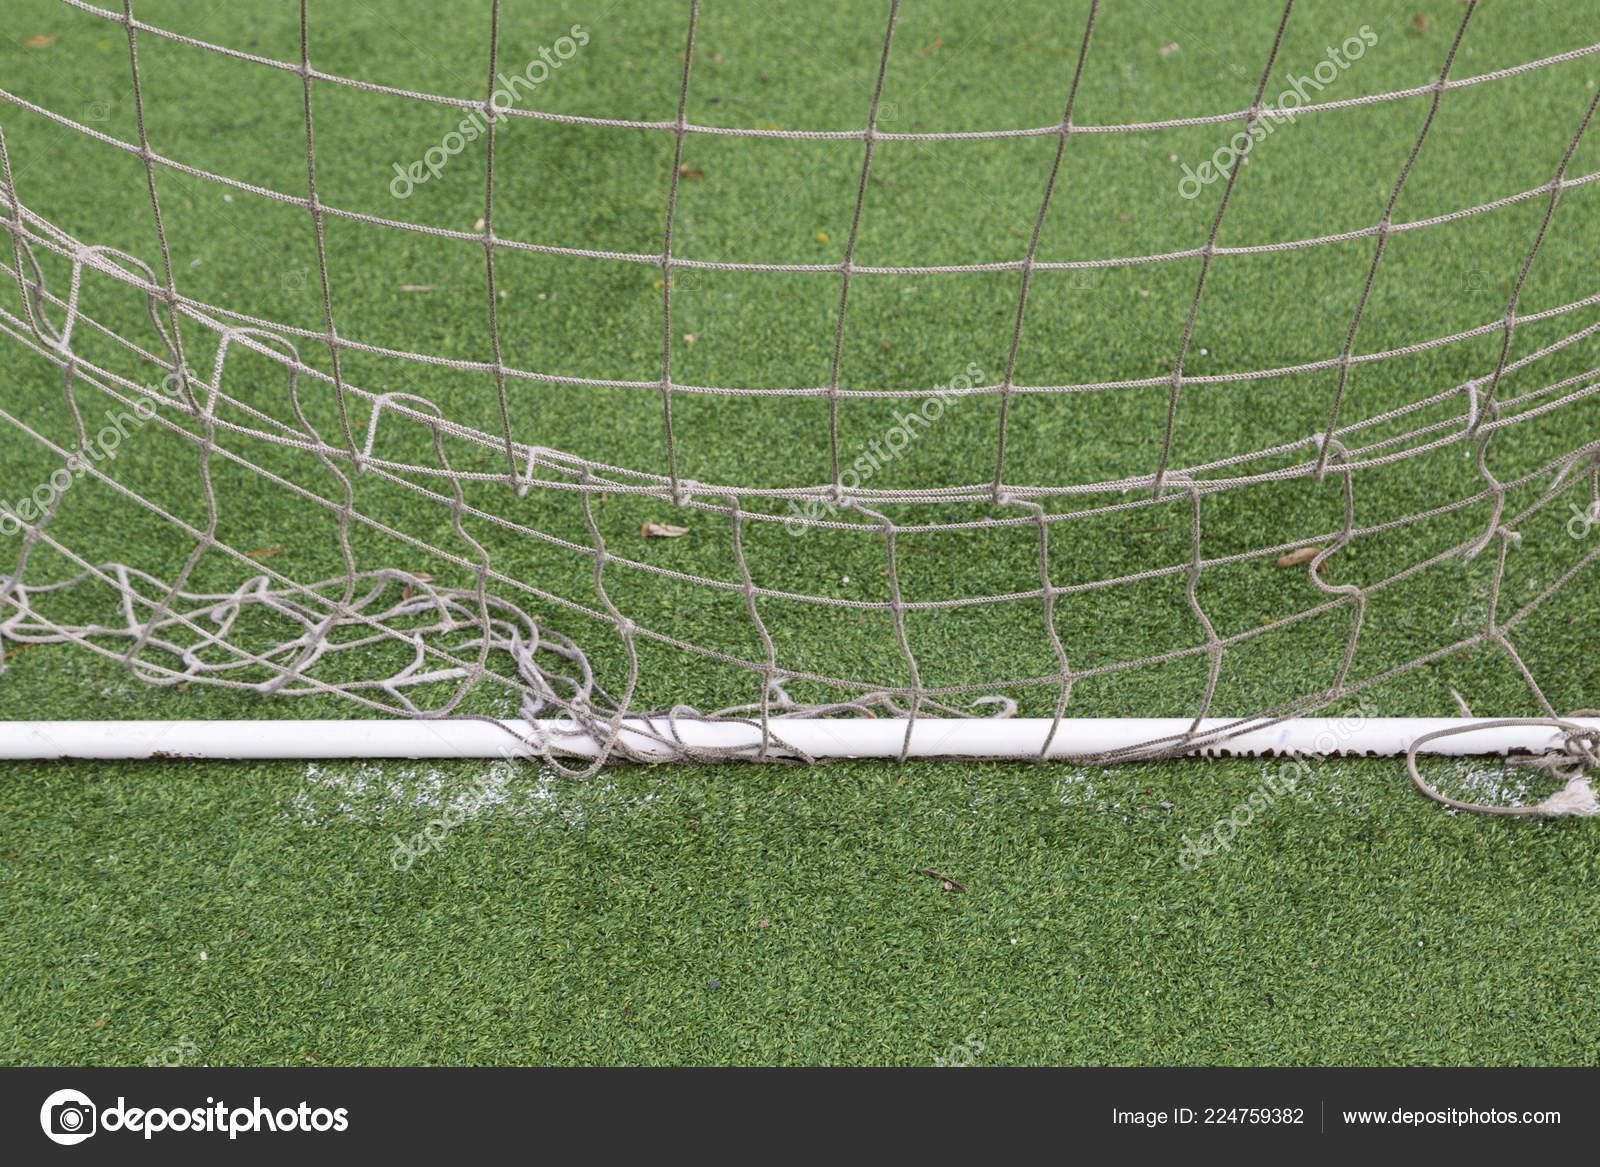 Abstract Soccer Goal Net Closeup Soccer Field Background Selective Focus Stock Photo Image By C Robsonphoto